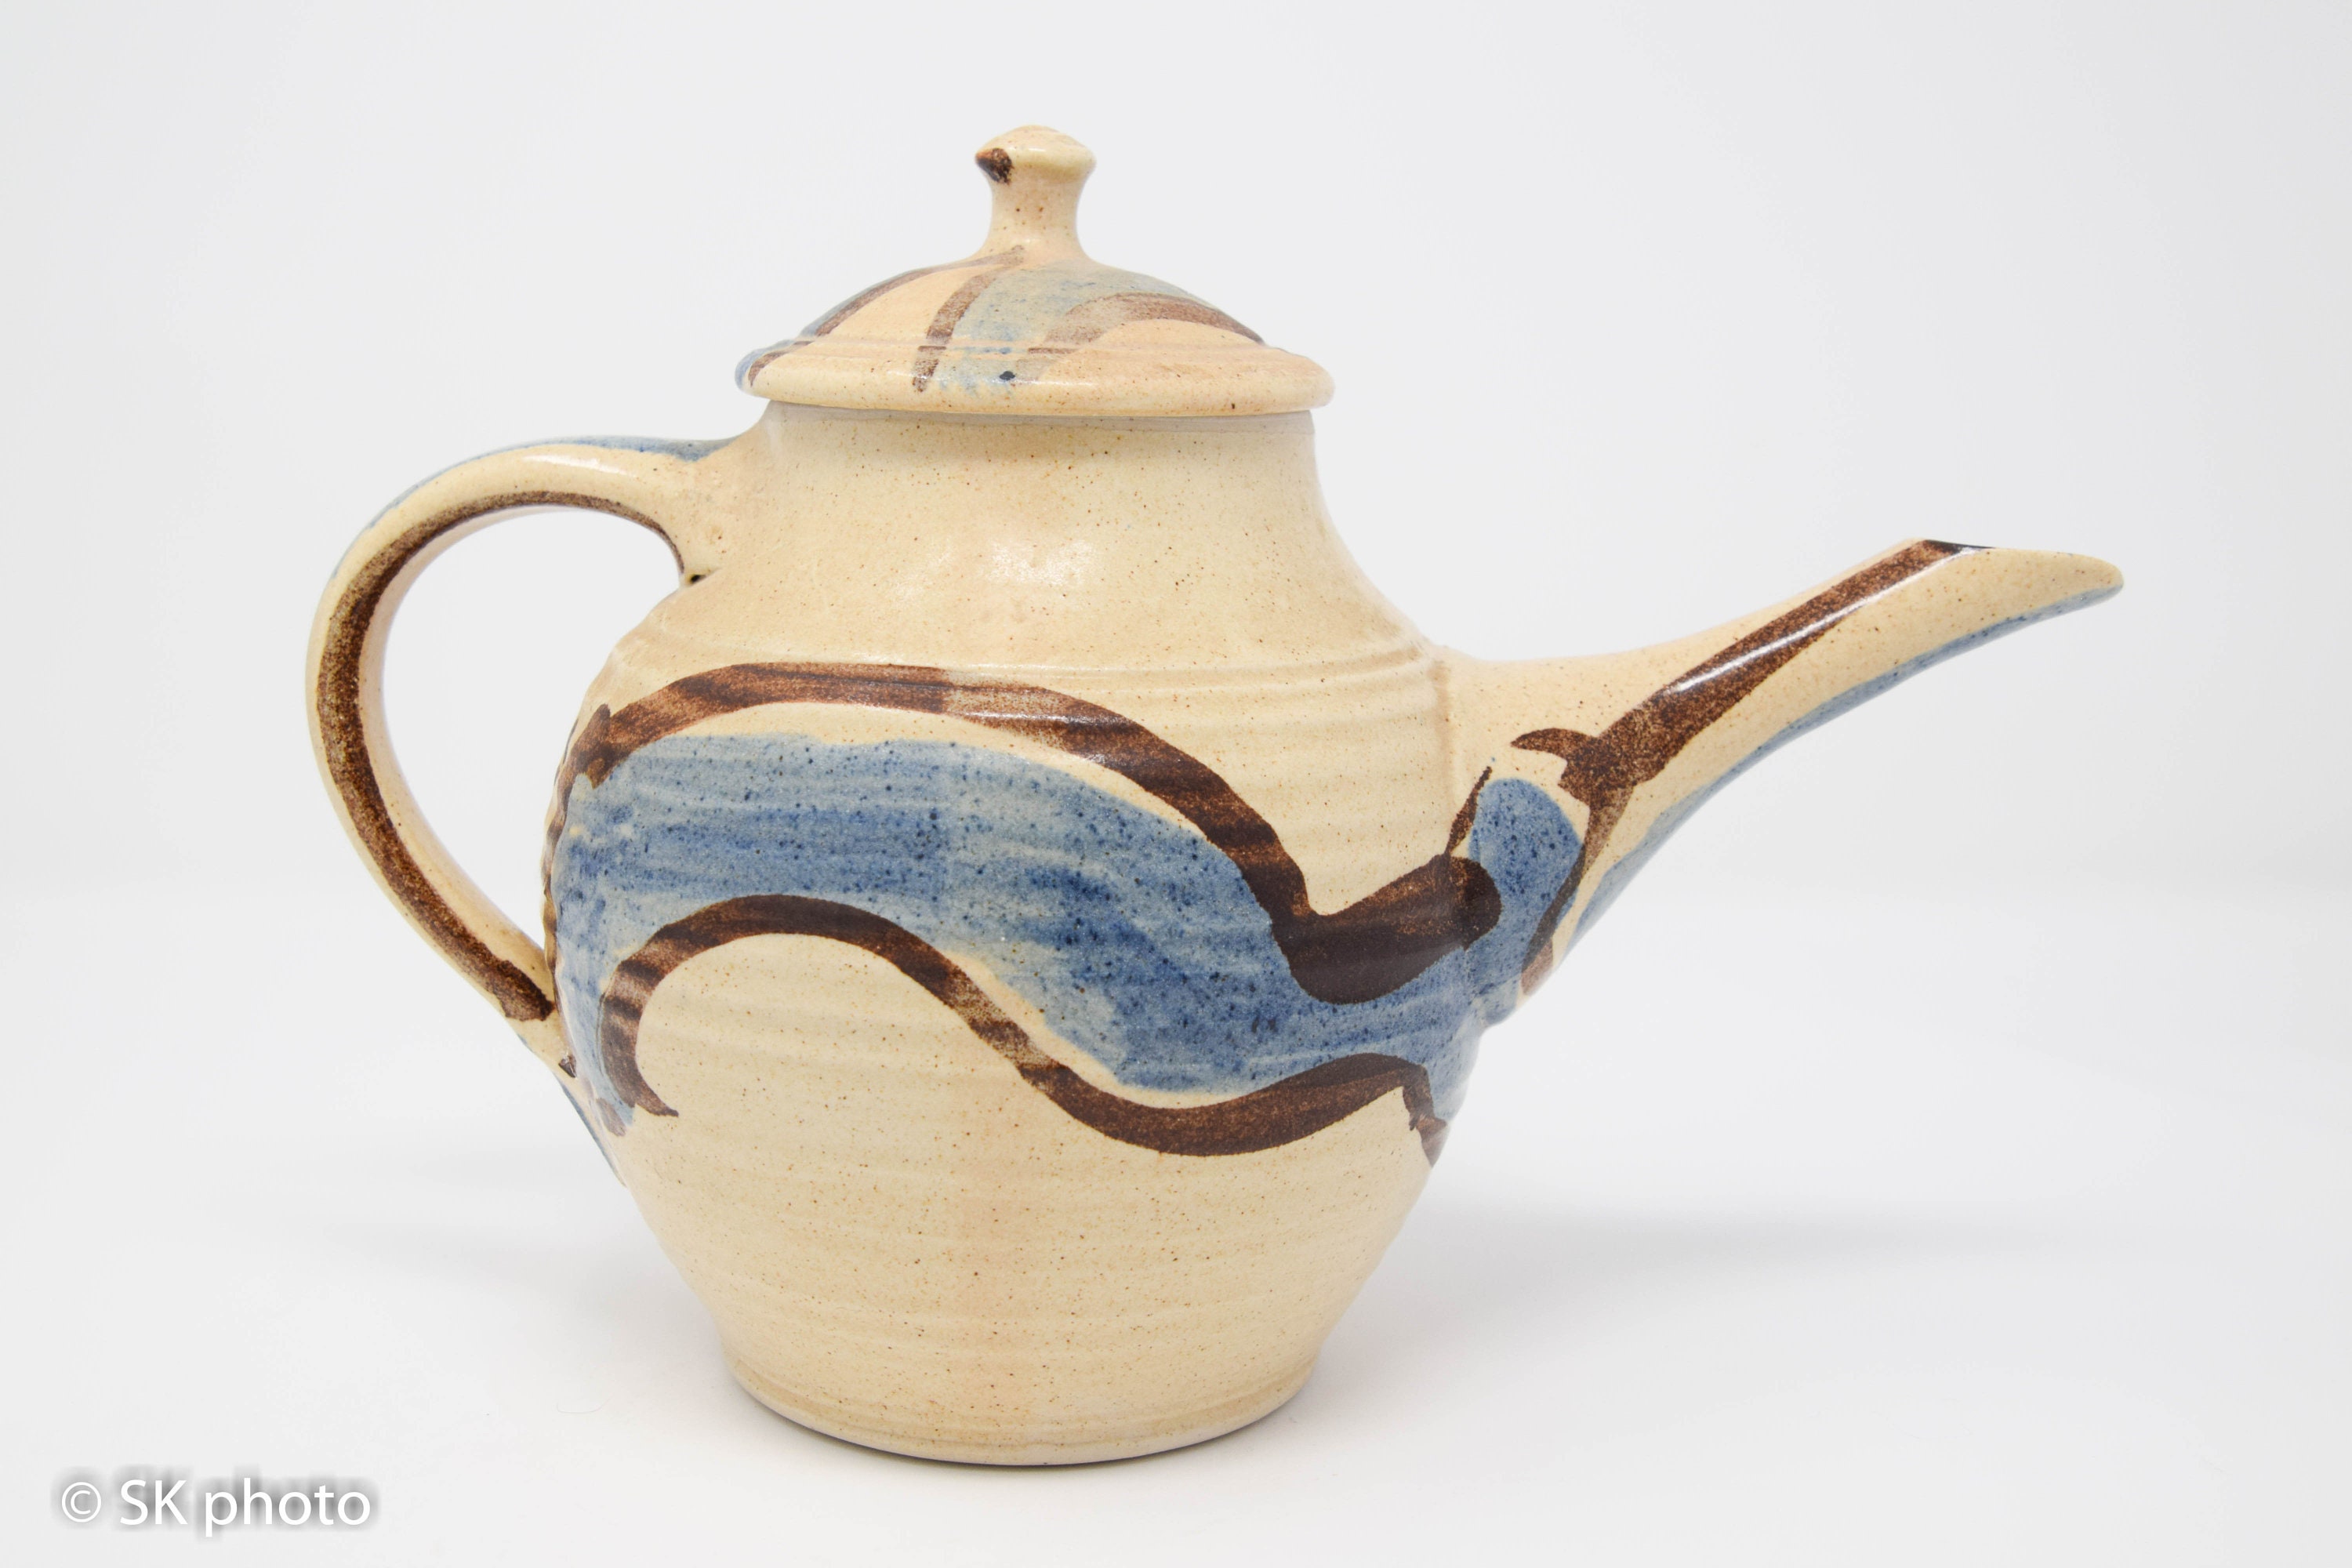 Vintage Teapot Hand-made by Horseshoe Mountain Pottery in